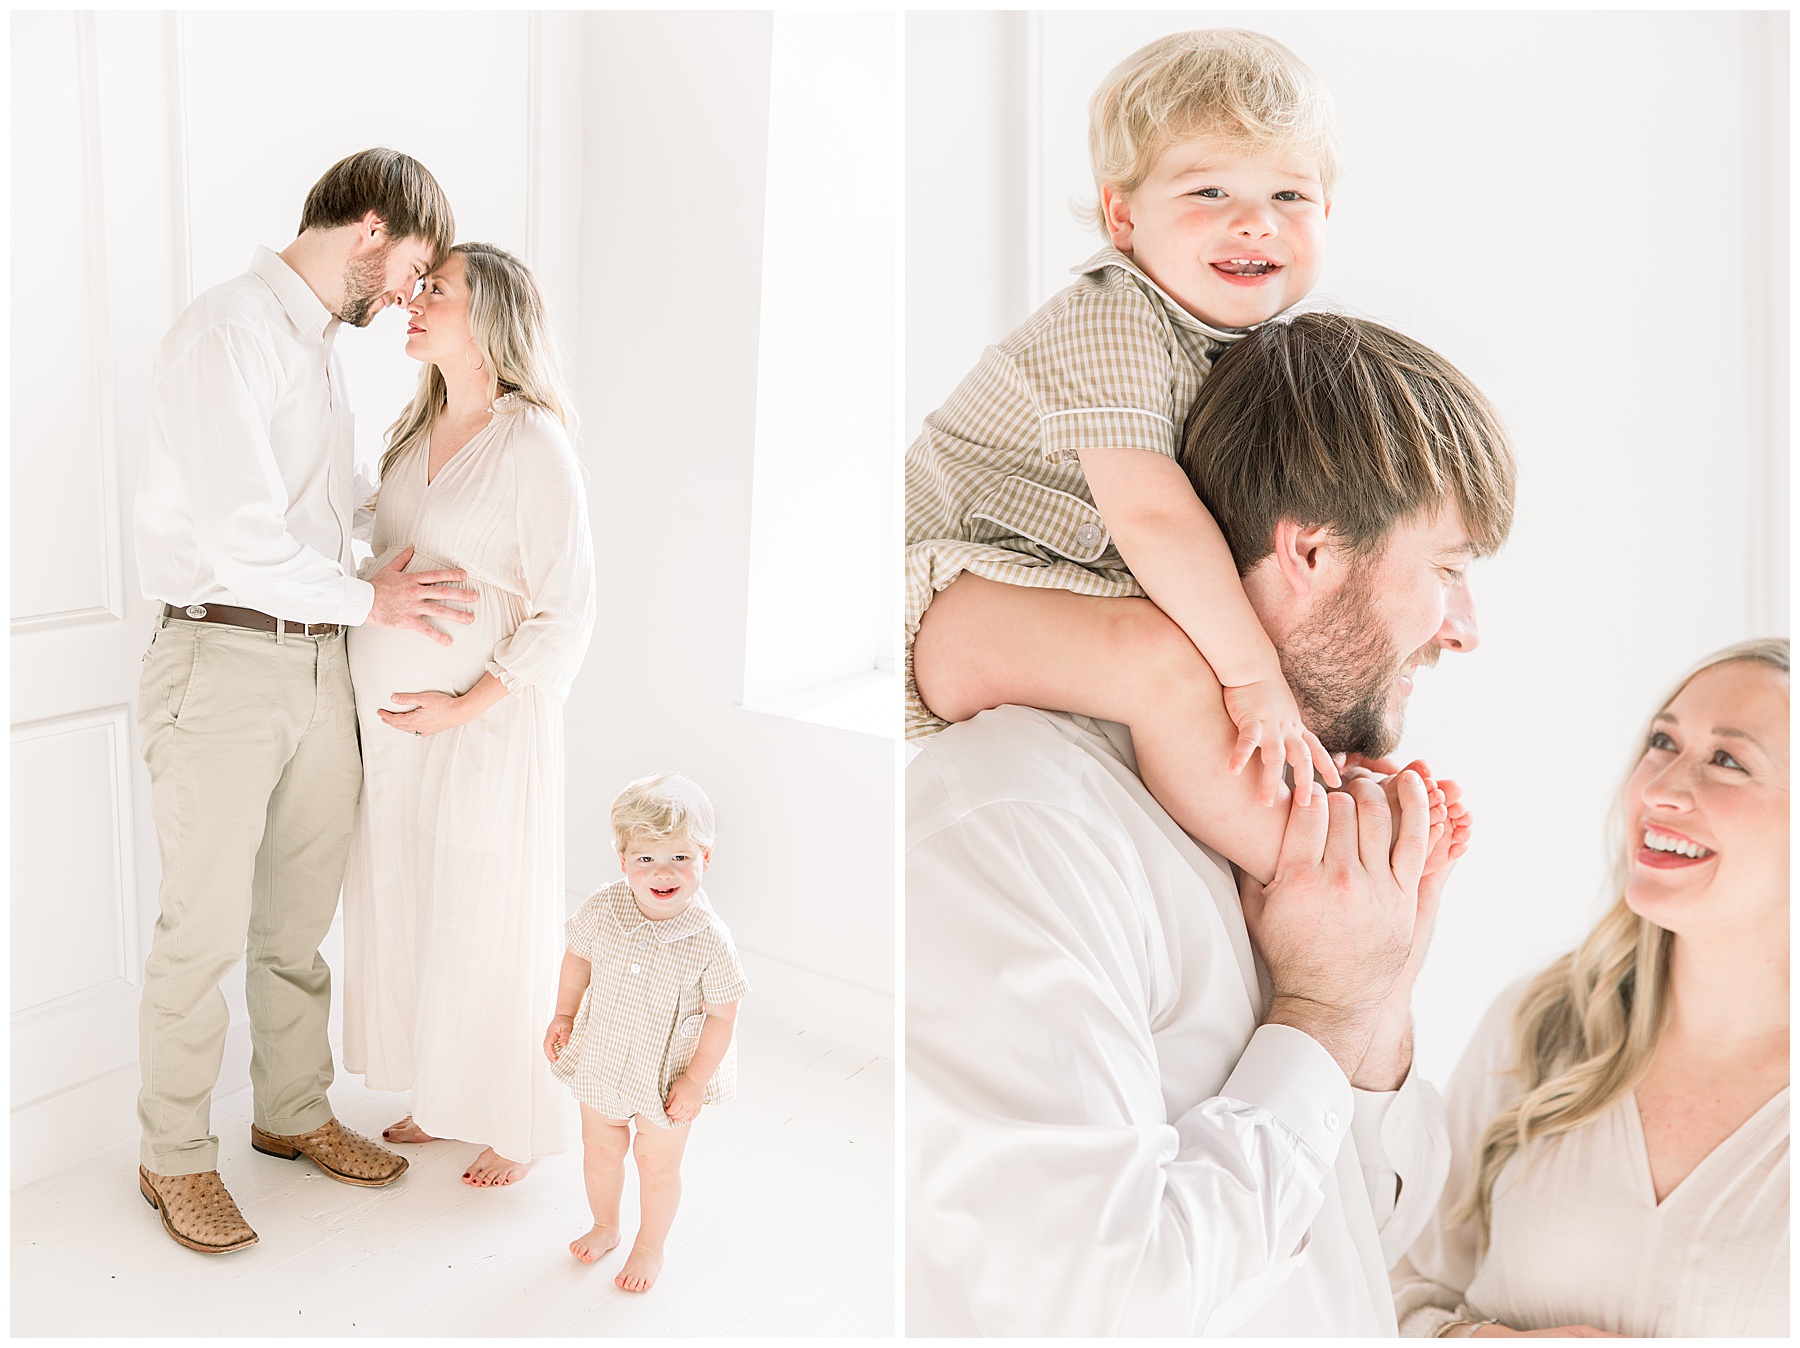 Family of 3 in a studio session with Weddington Maternity Photographer Katie Petrick photography